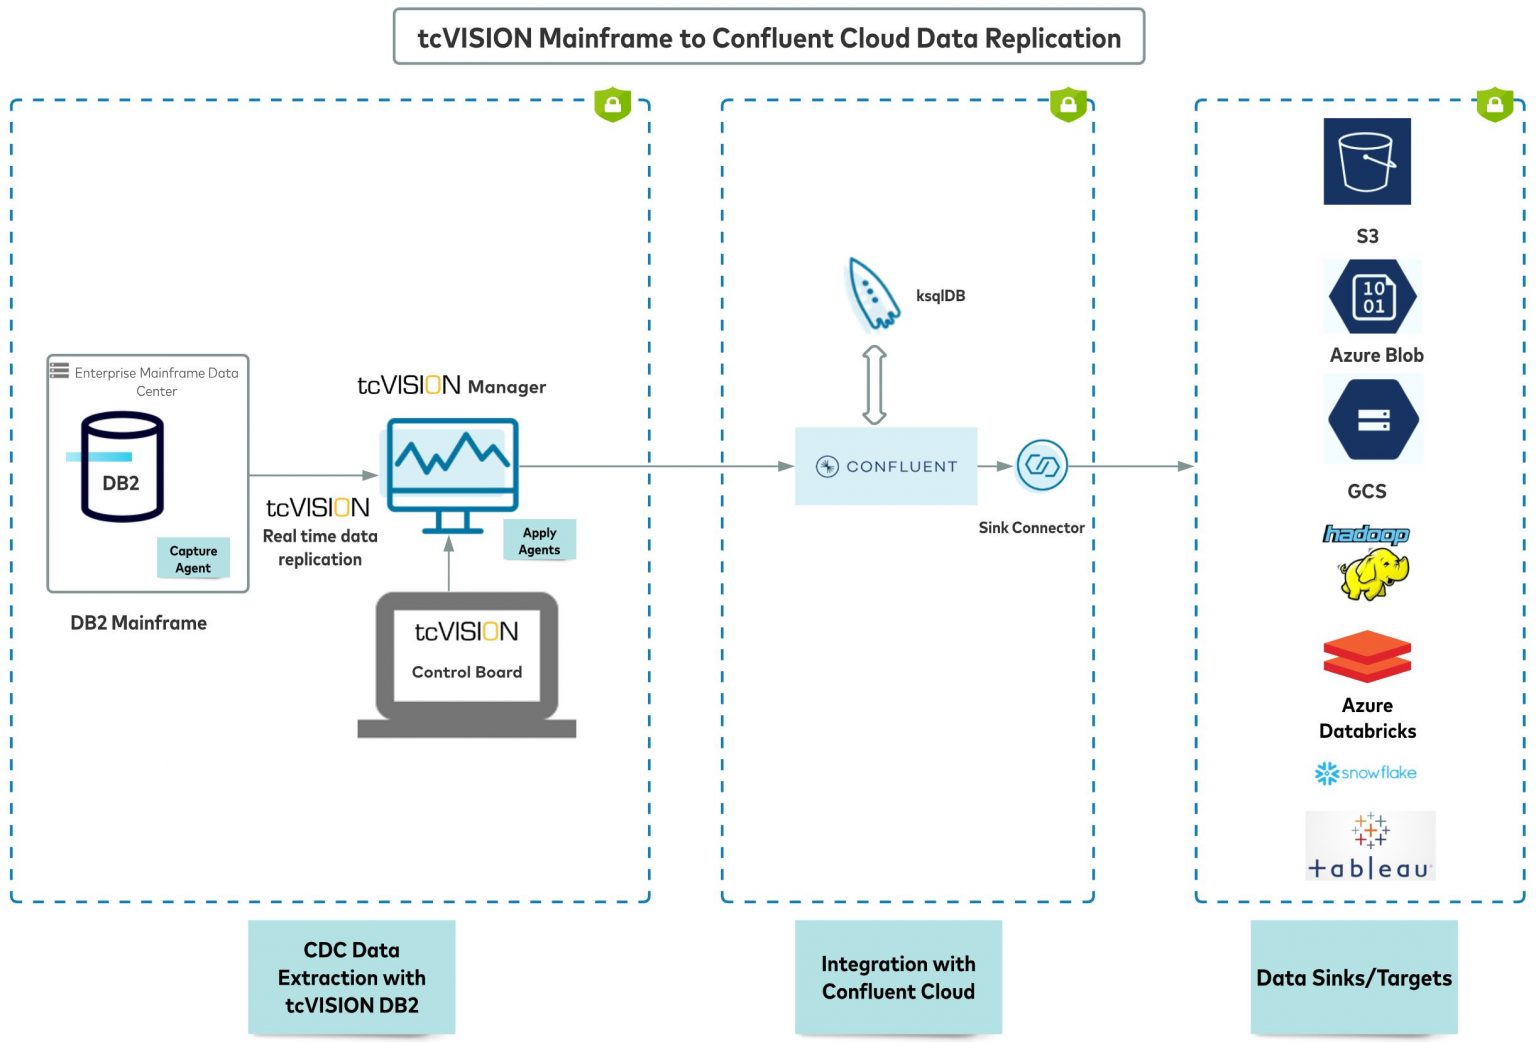 tcvision-mainframe-to-confluent-cloud-data-replication-1536x1042